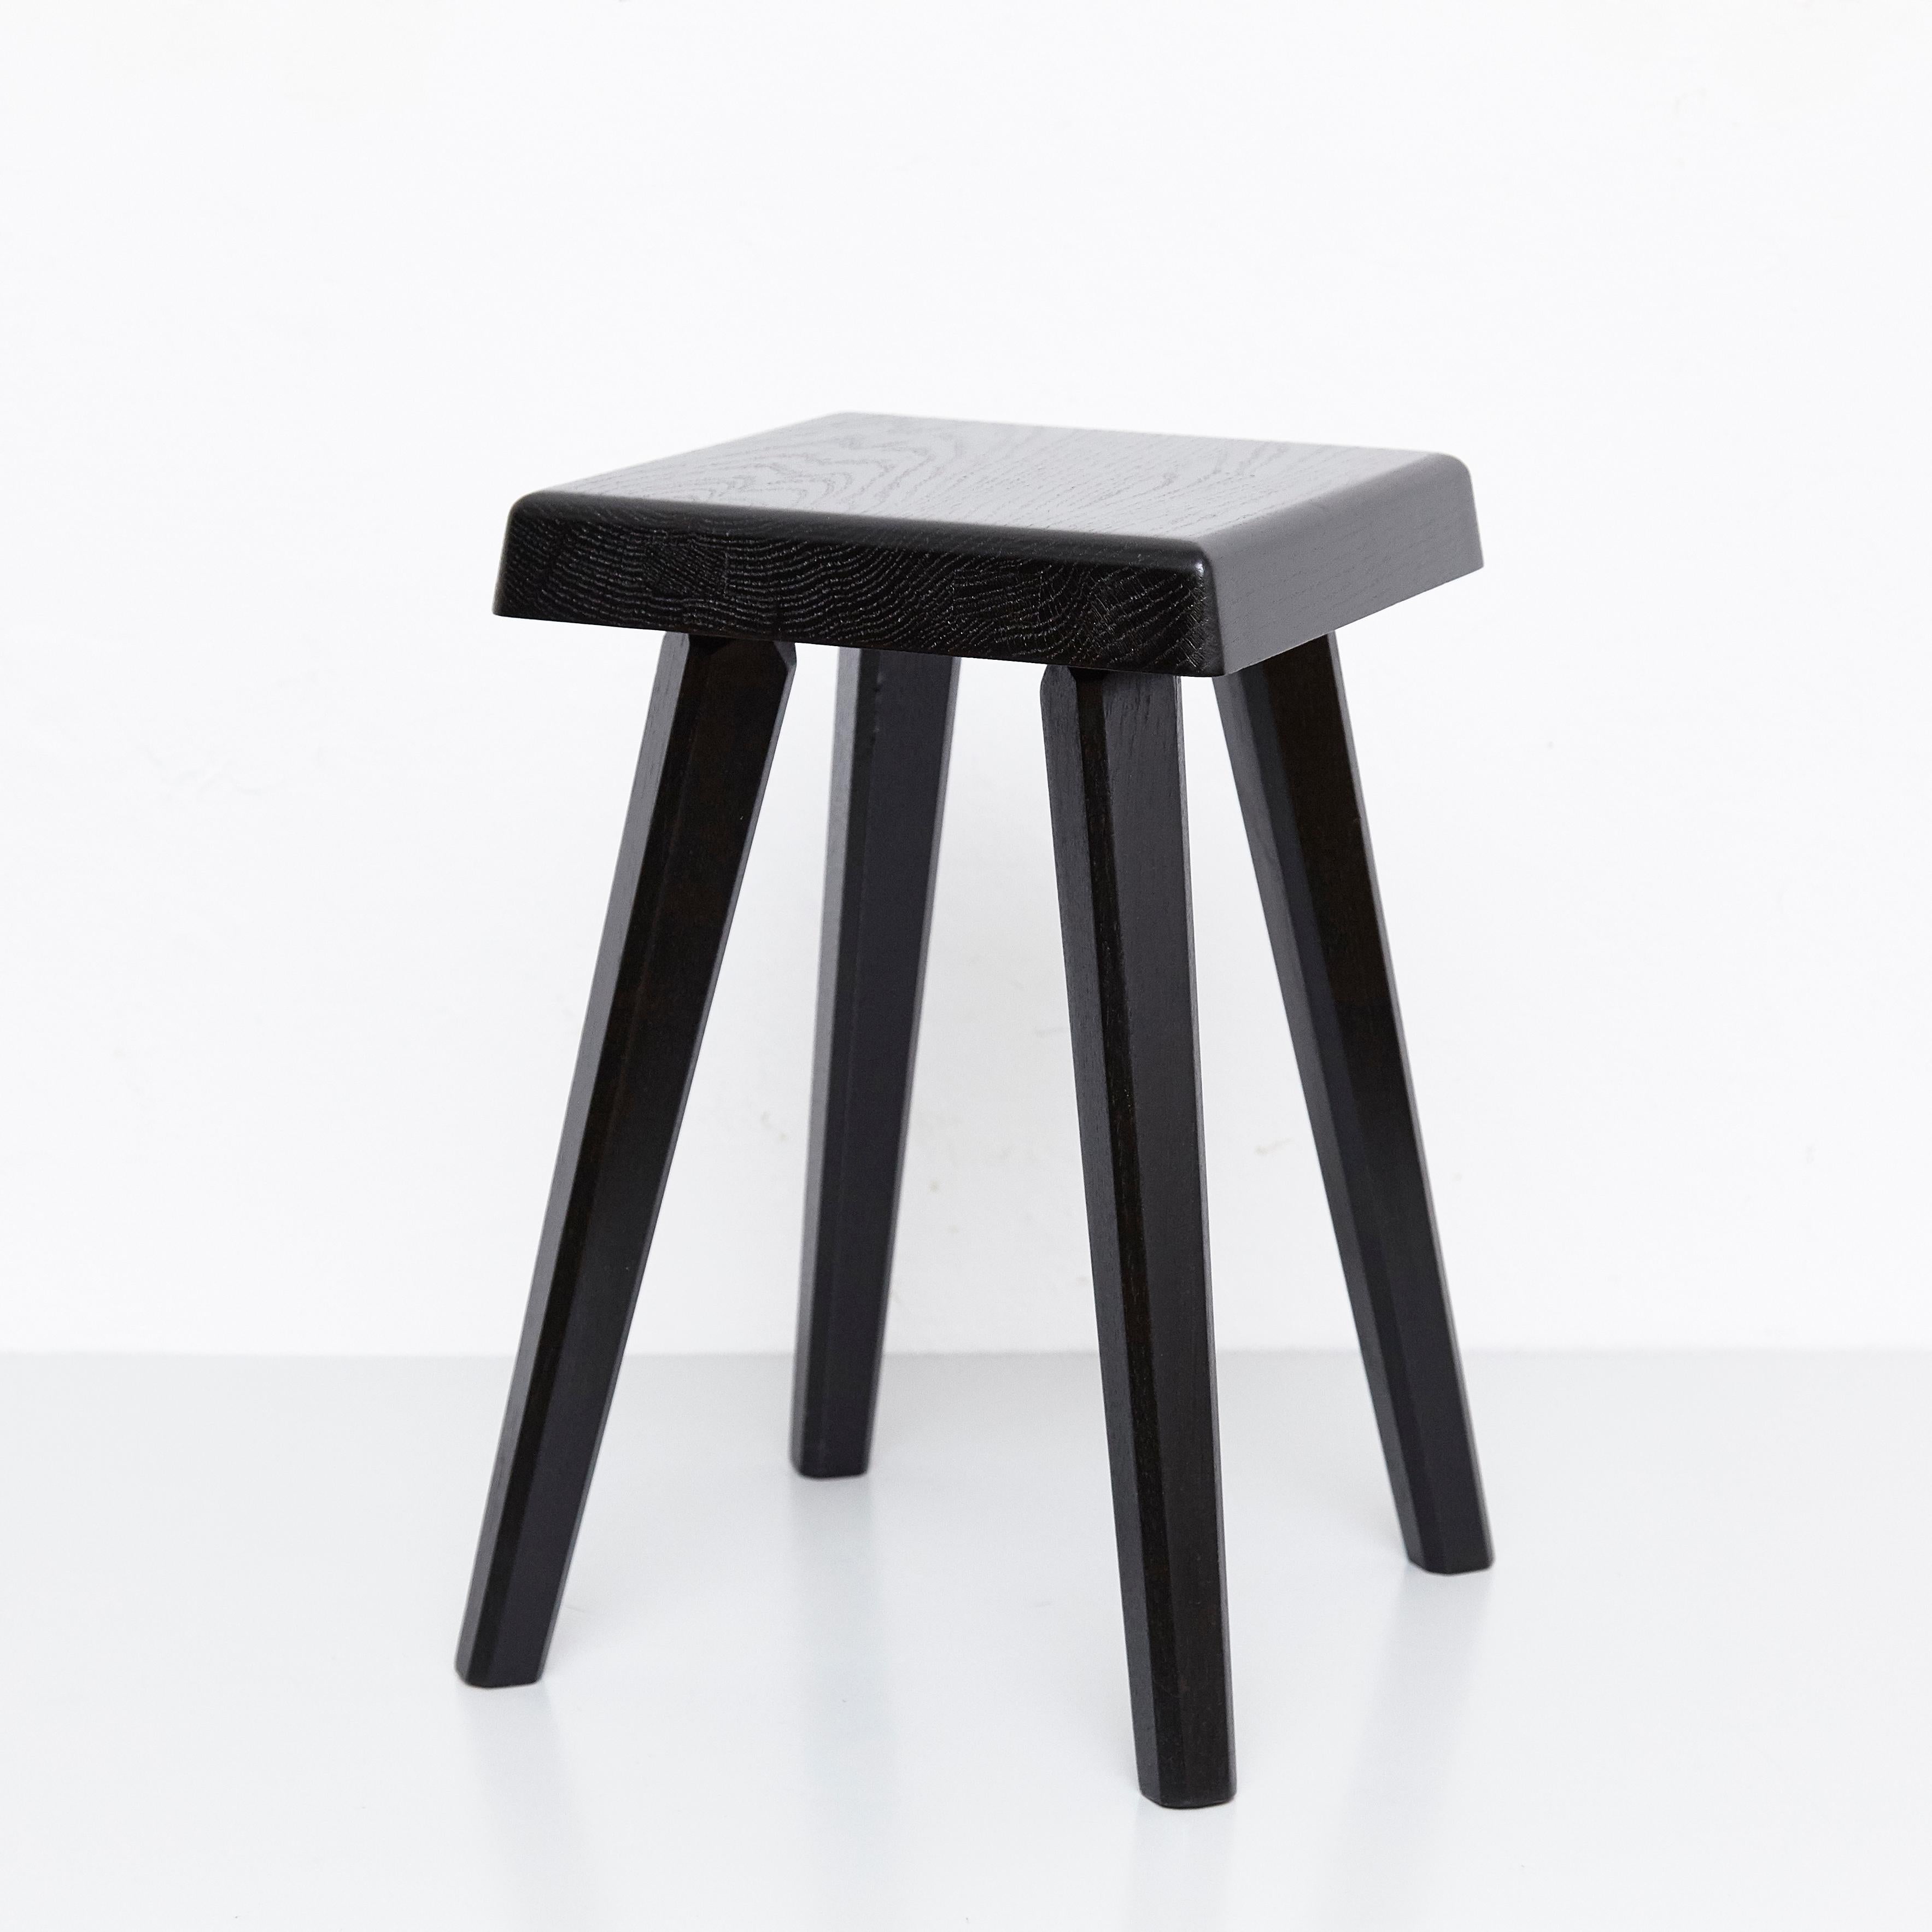 Special black edition stools designed by Pierre Chapo, manufactured in France, 1960s.
Manufactured by Chapo creations in 2019

Solid oakwood.

Stamped

Measures: Small 29 x 29 x 33 cm
Tall 29 x 29 x 45 cm

In good original condition, with